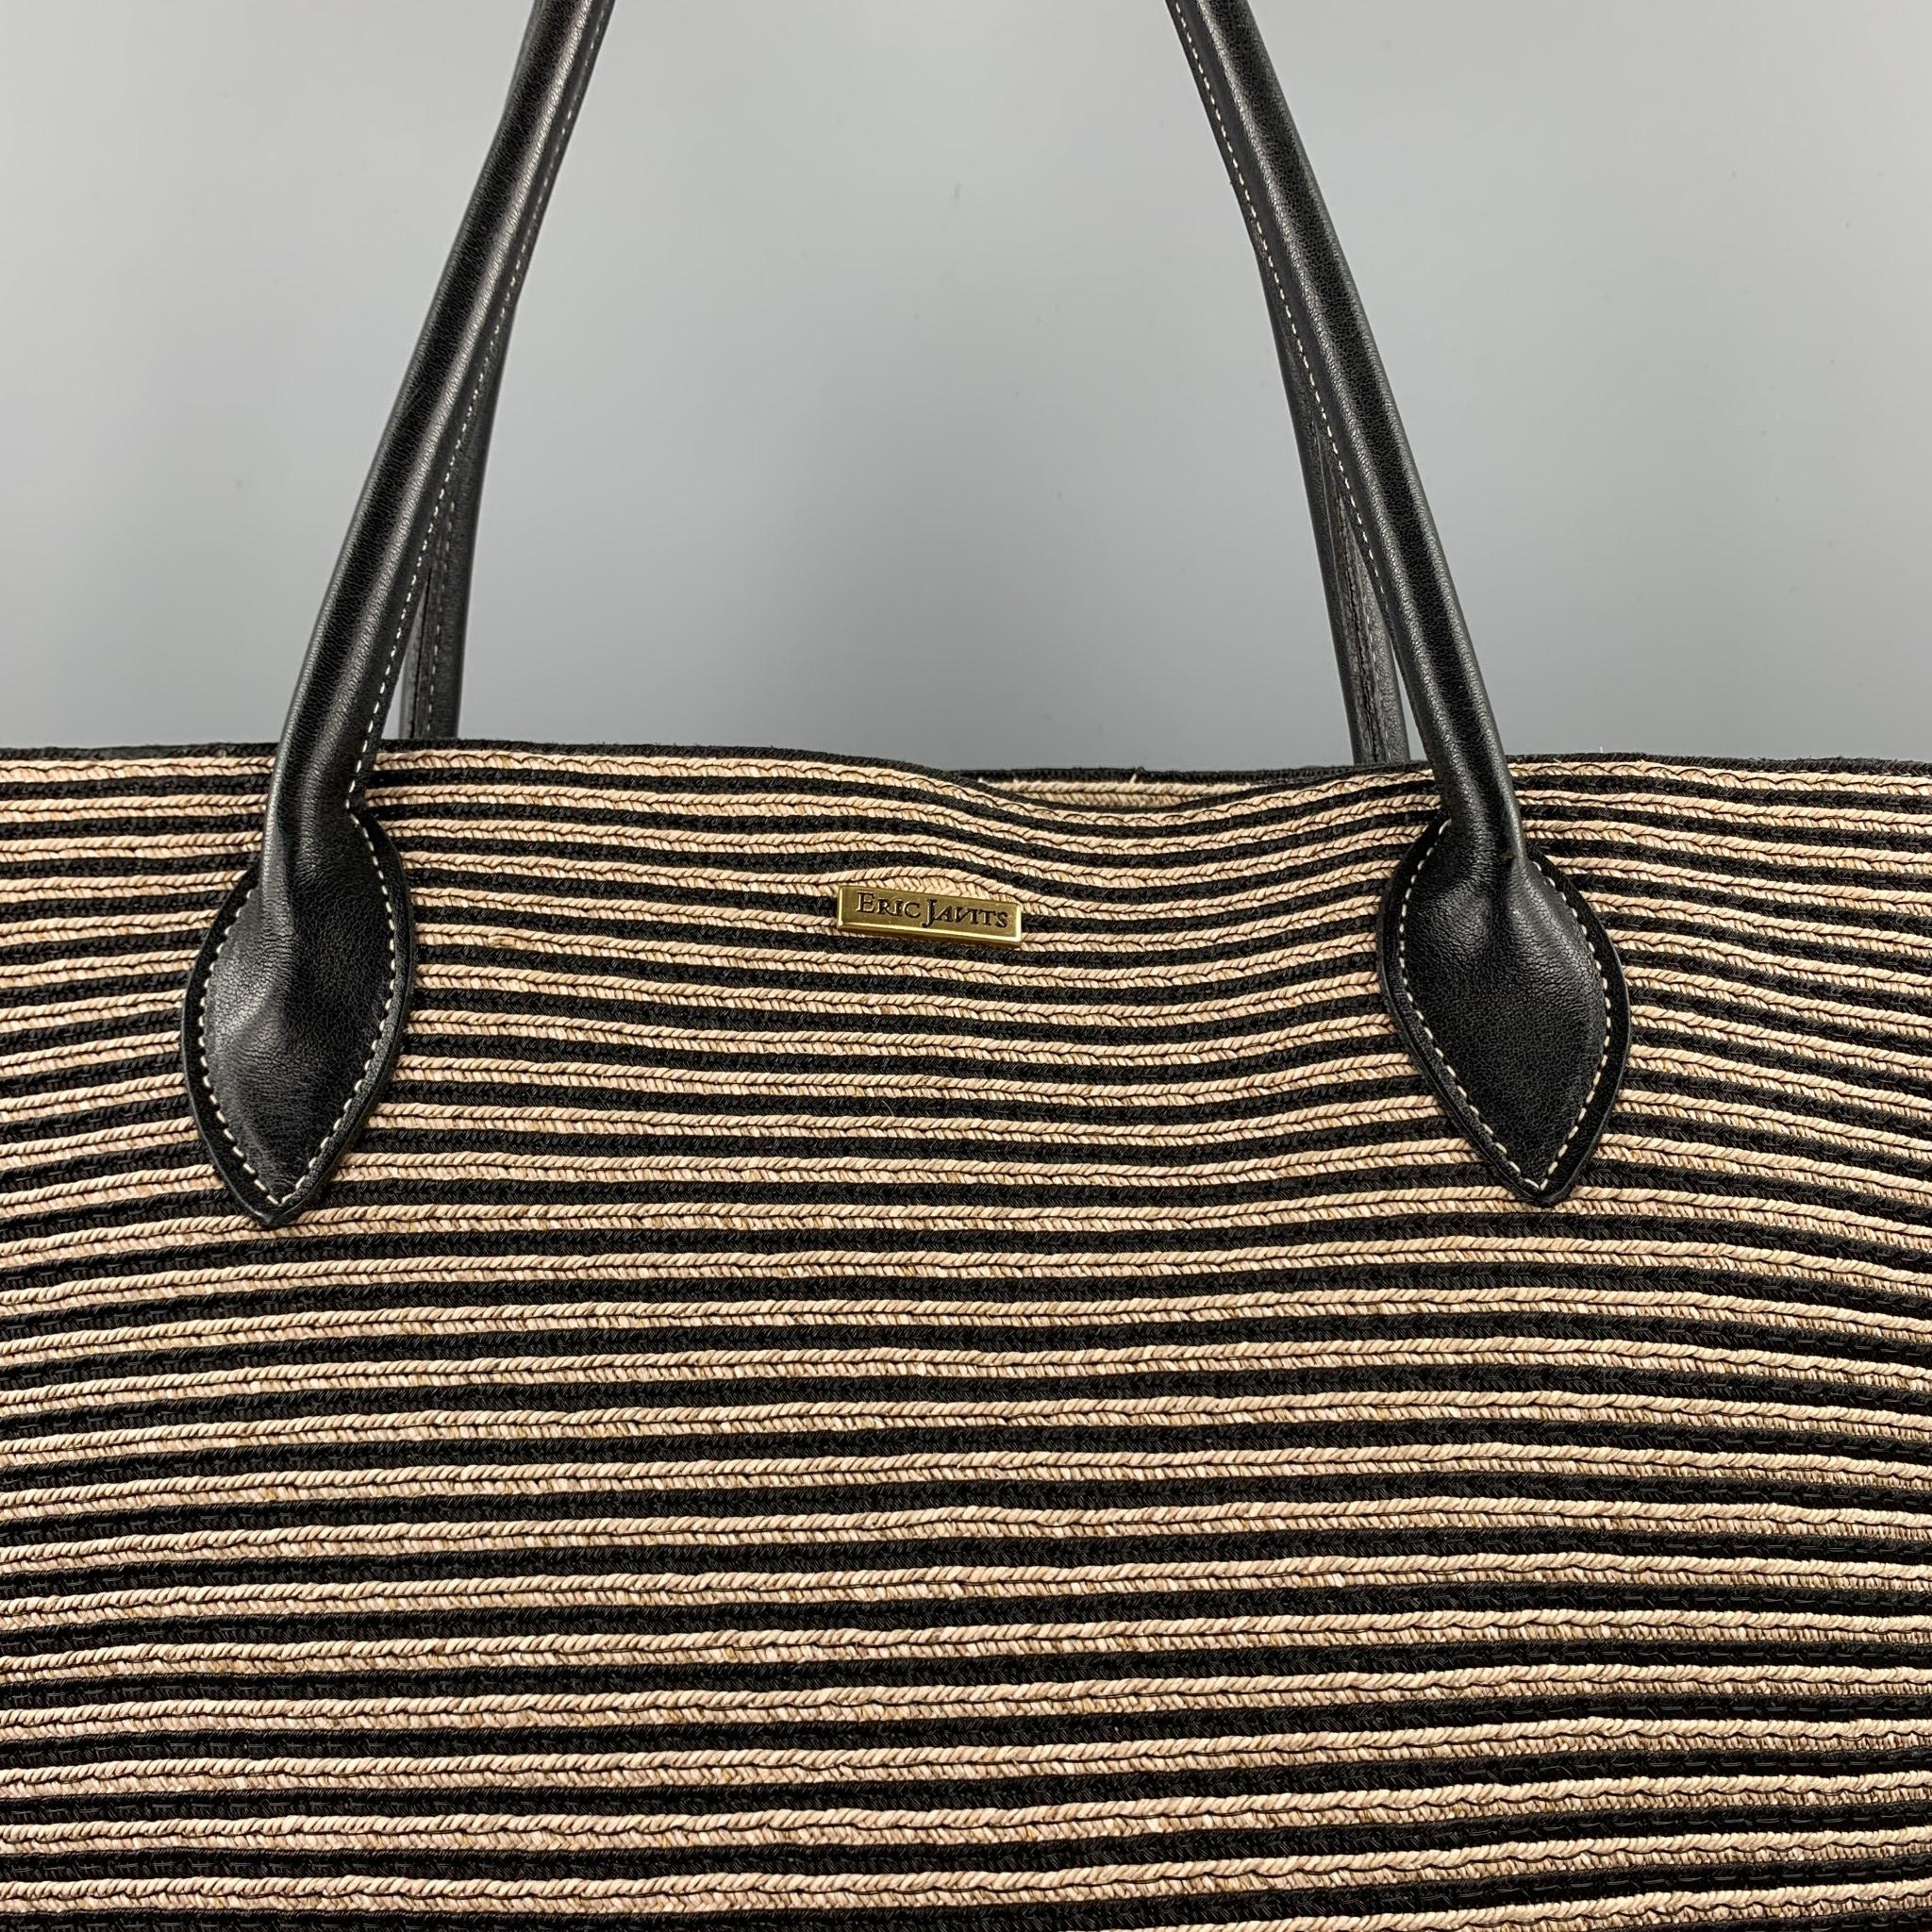 ERIC JAVTIS handbag comes in a black & beige straw with leather trim top handles featuring a tote style, red interior, one inner slot, and a magnetic snap button closure. 

Very Good Pre-Owned Condition.

Measurements:

Length: 10.5 in.
Width: 3.5